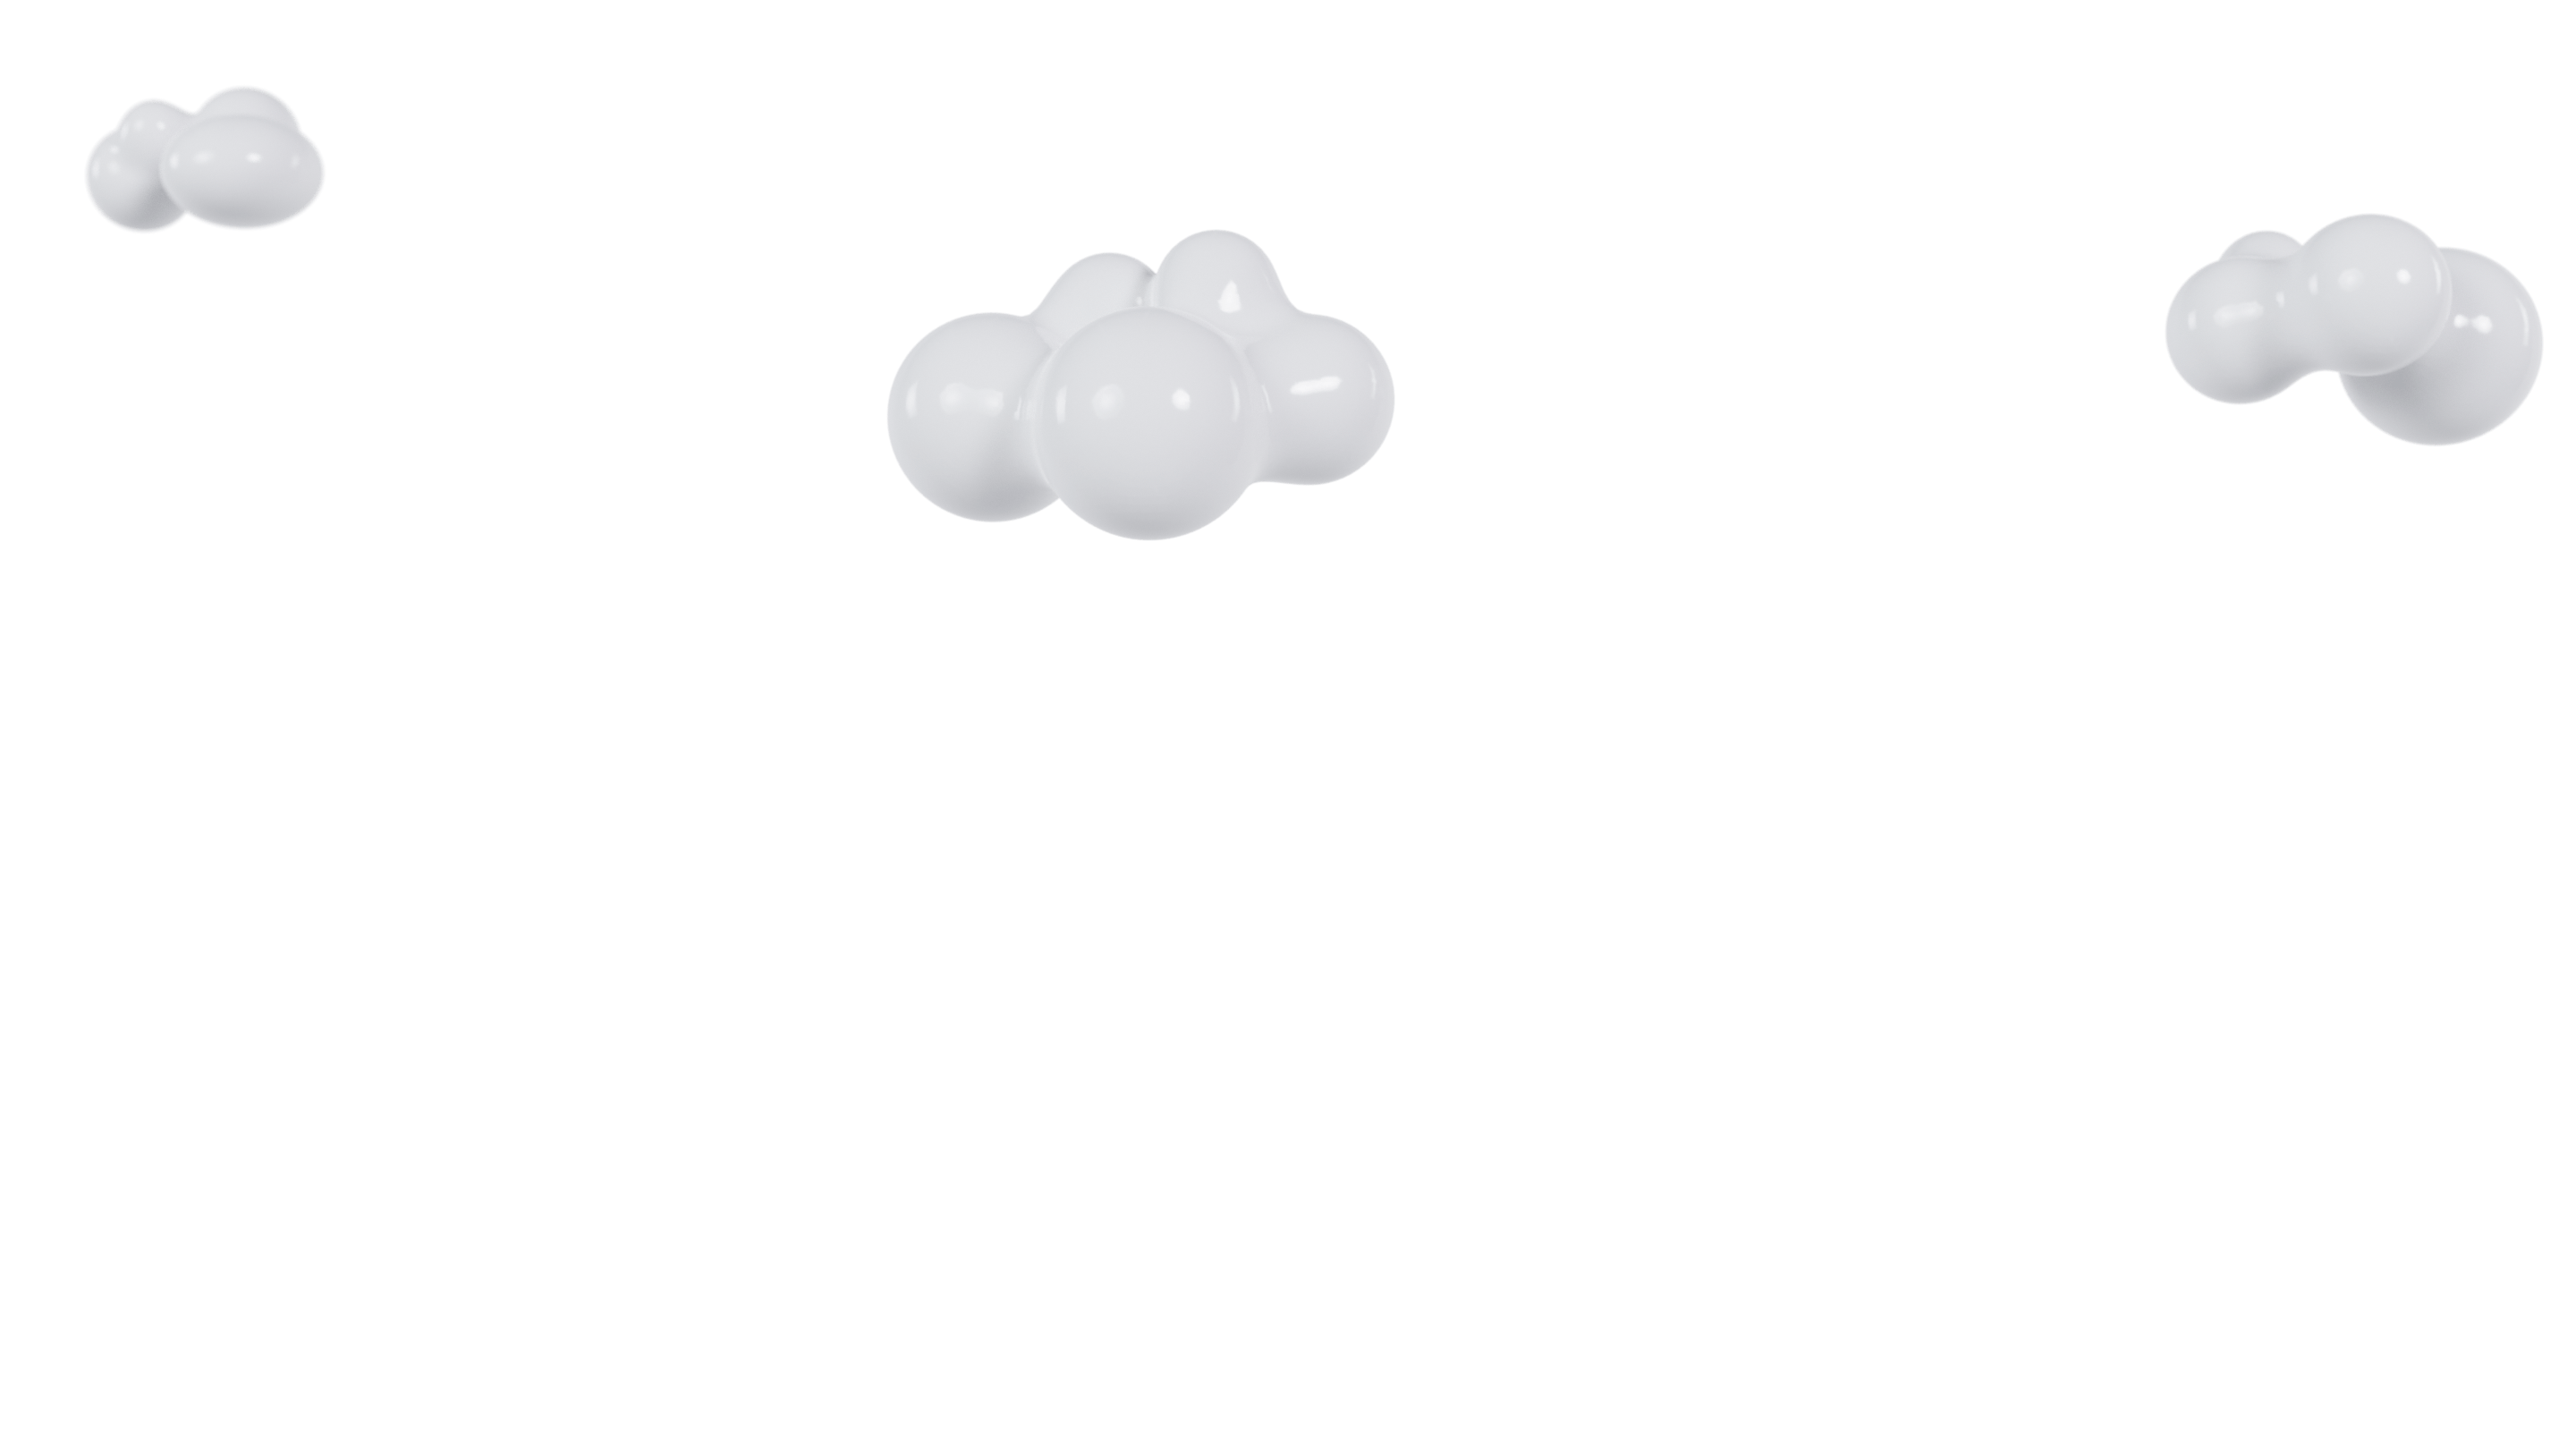 Clouds as 3D objects